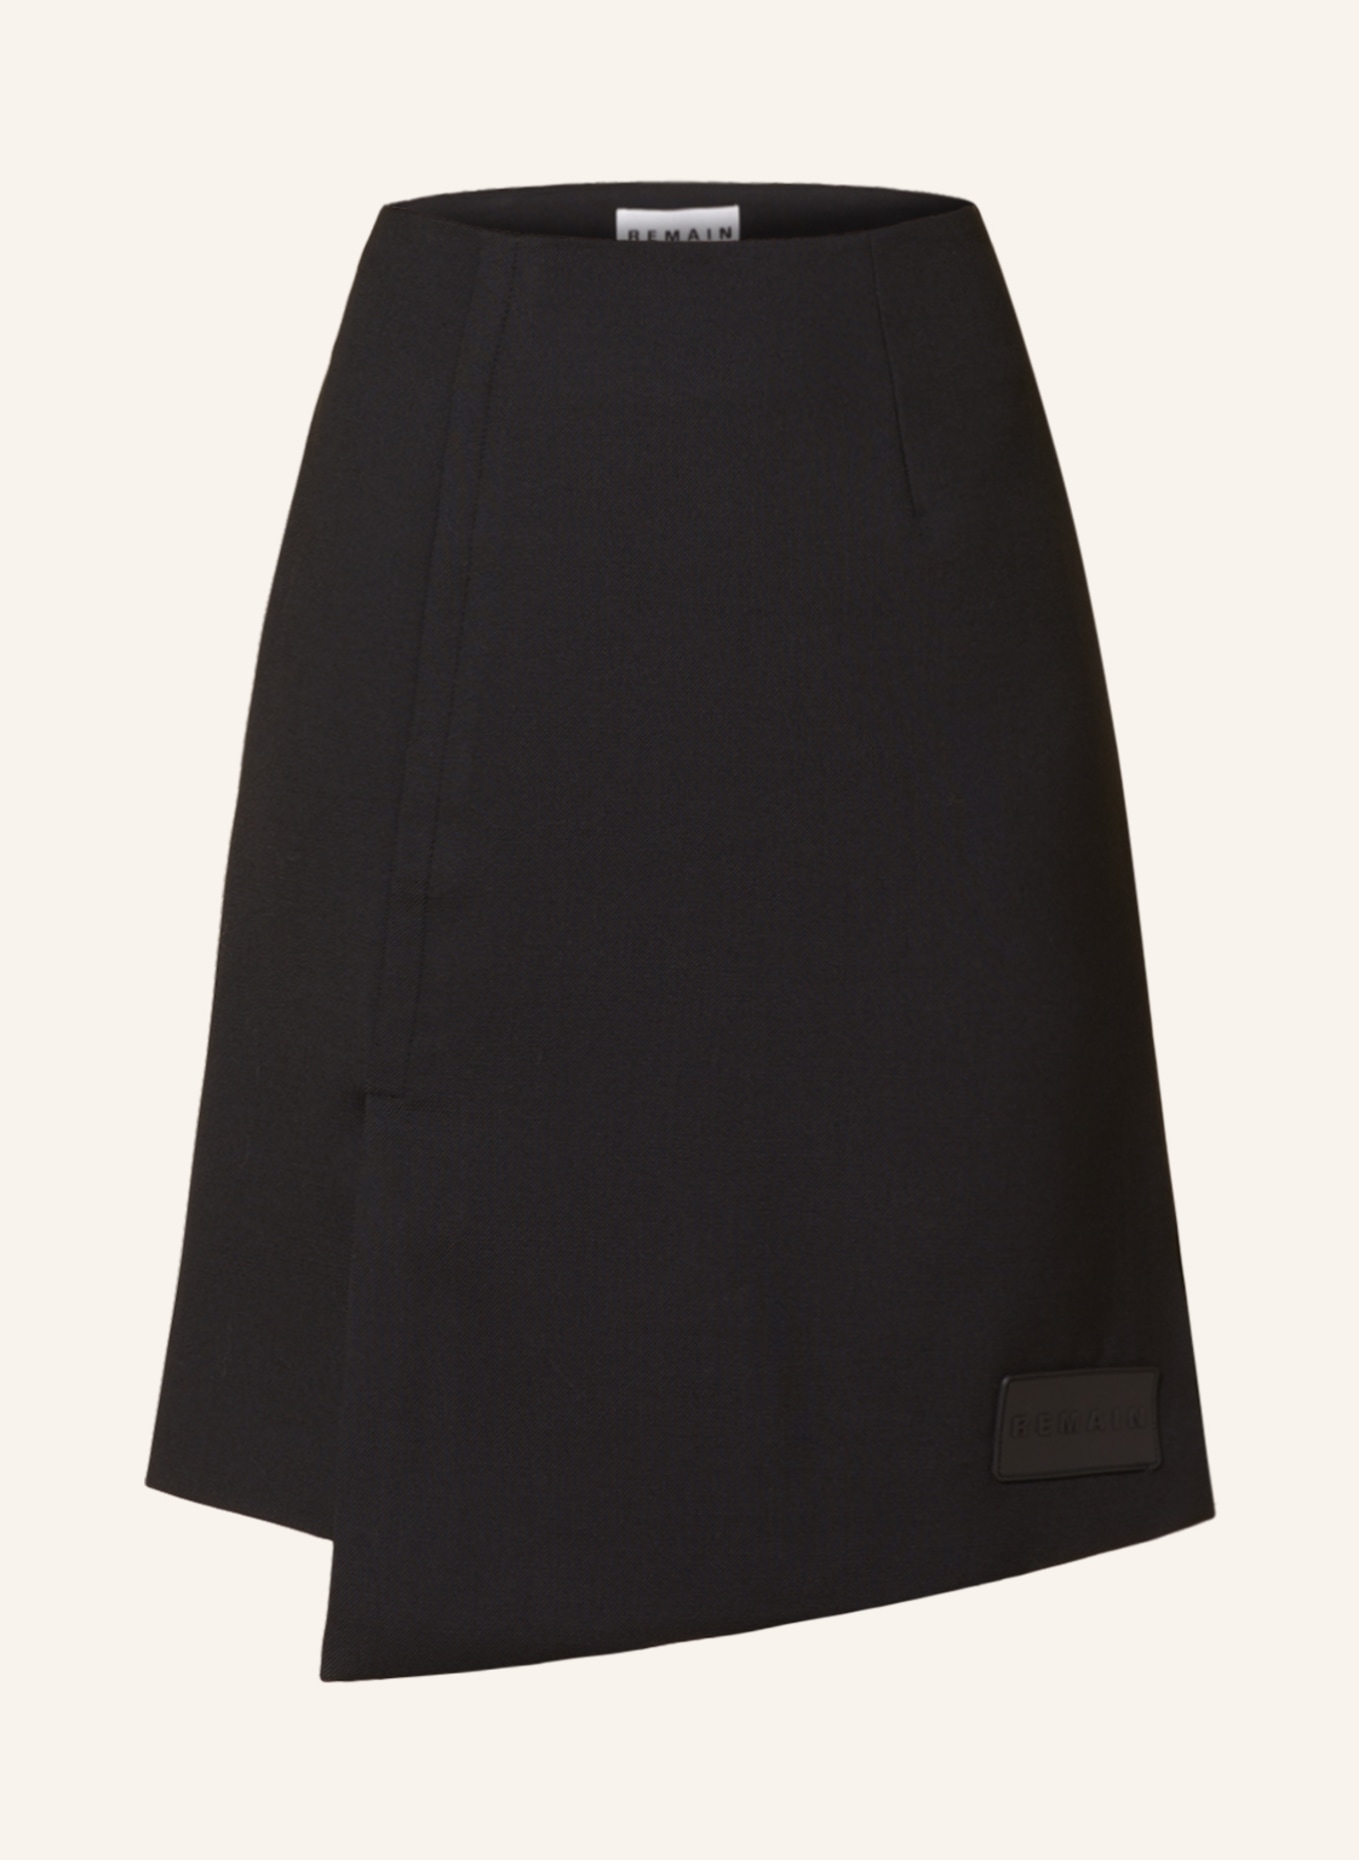 REMAIN Skirt HEAVY SUITING in wrap look, Color: BLACK (Image 1)